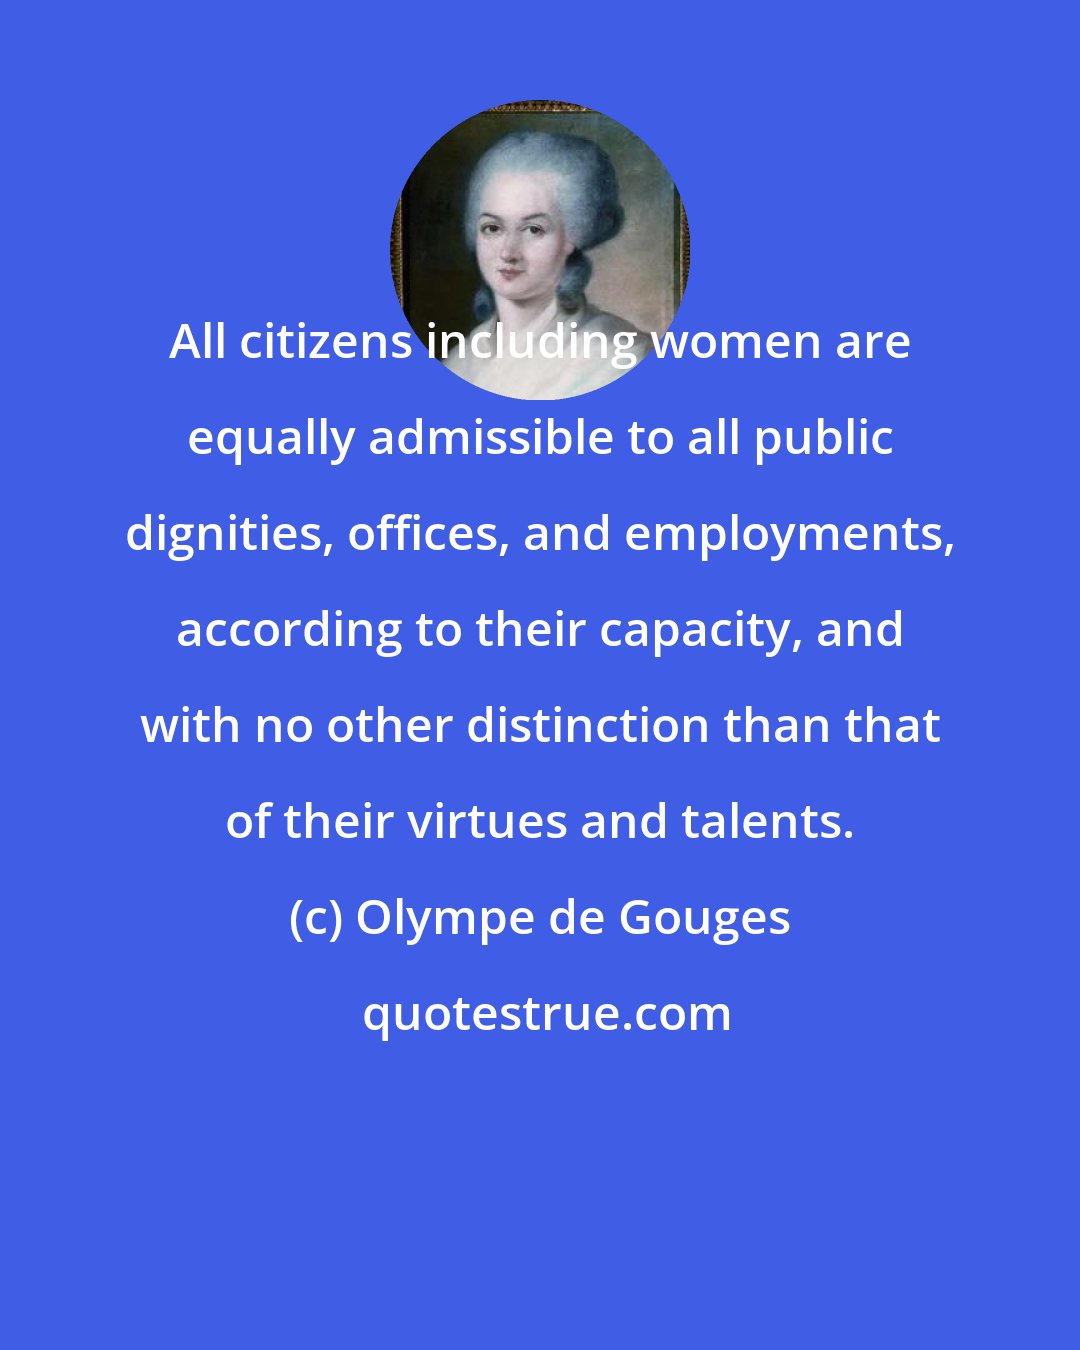 Olympe de Gouges: All citizens including women are equally admissible to all public dignities, offices, and employments, according to their capacity, and with no other distinction than that of their virtues and talents.